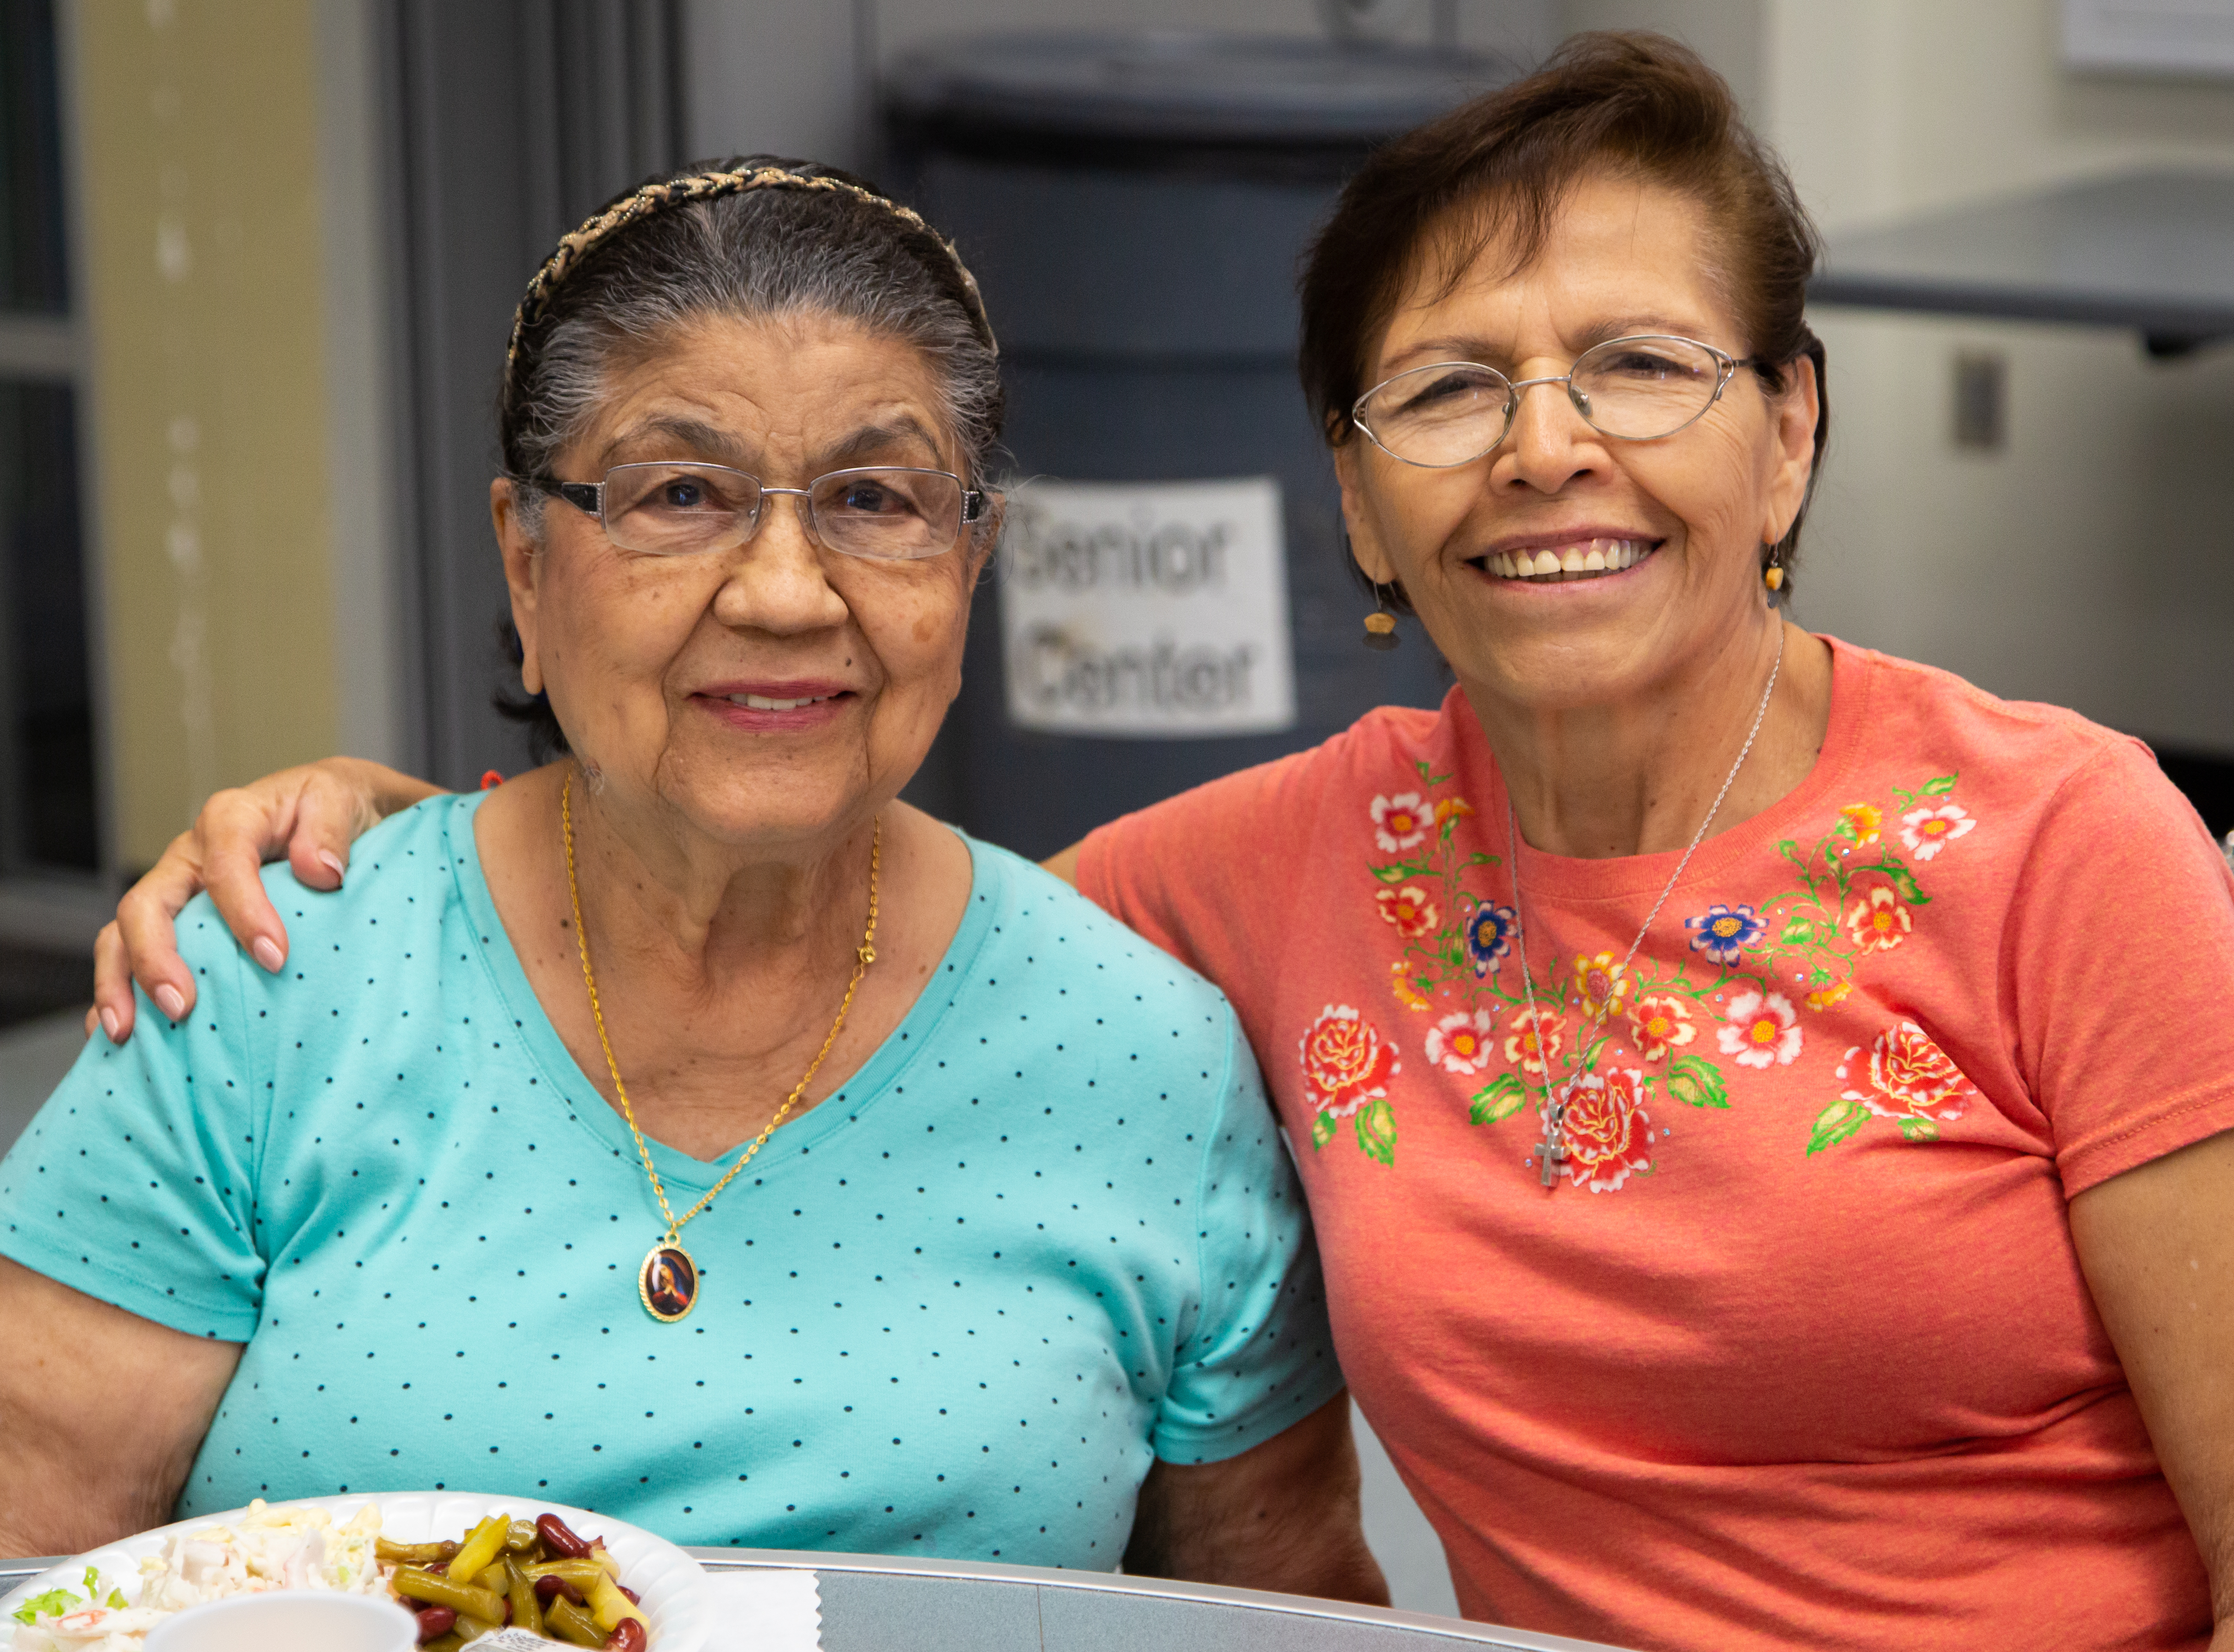 Sponsor one senior’s access to a month of nutritious lunches offered at local senior centers: $125